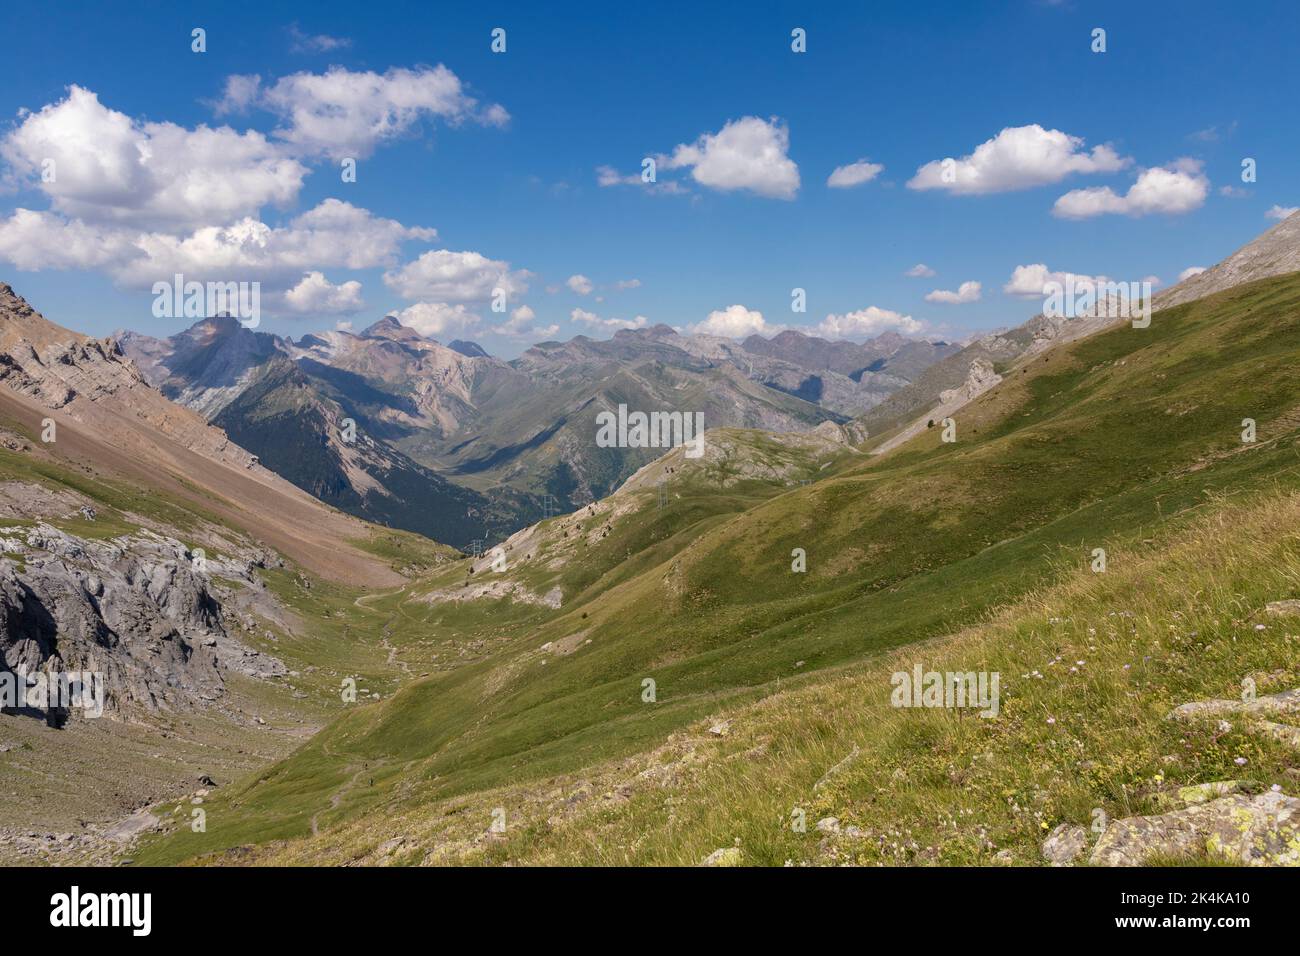 Picturesque view of the Pyrenees landscape with green meadows and mountains during the day. Summer trip in the mountains Stock Photo